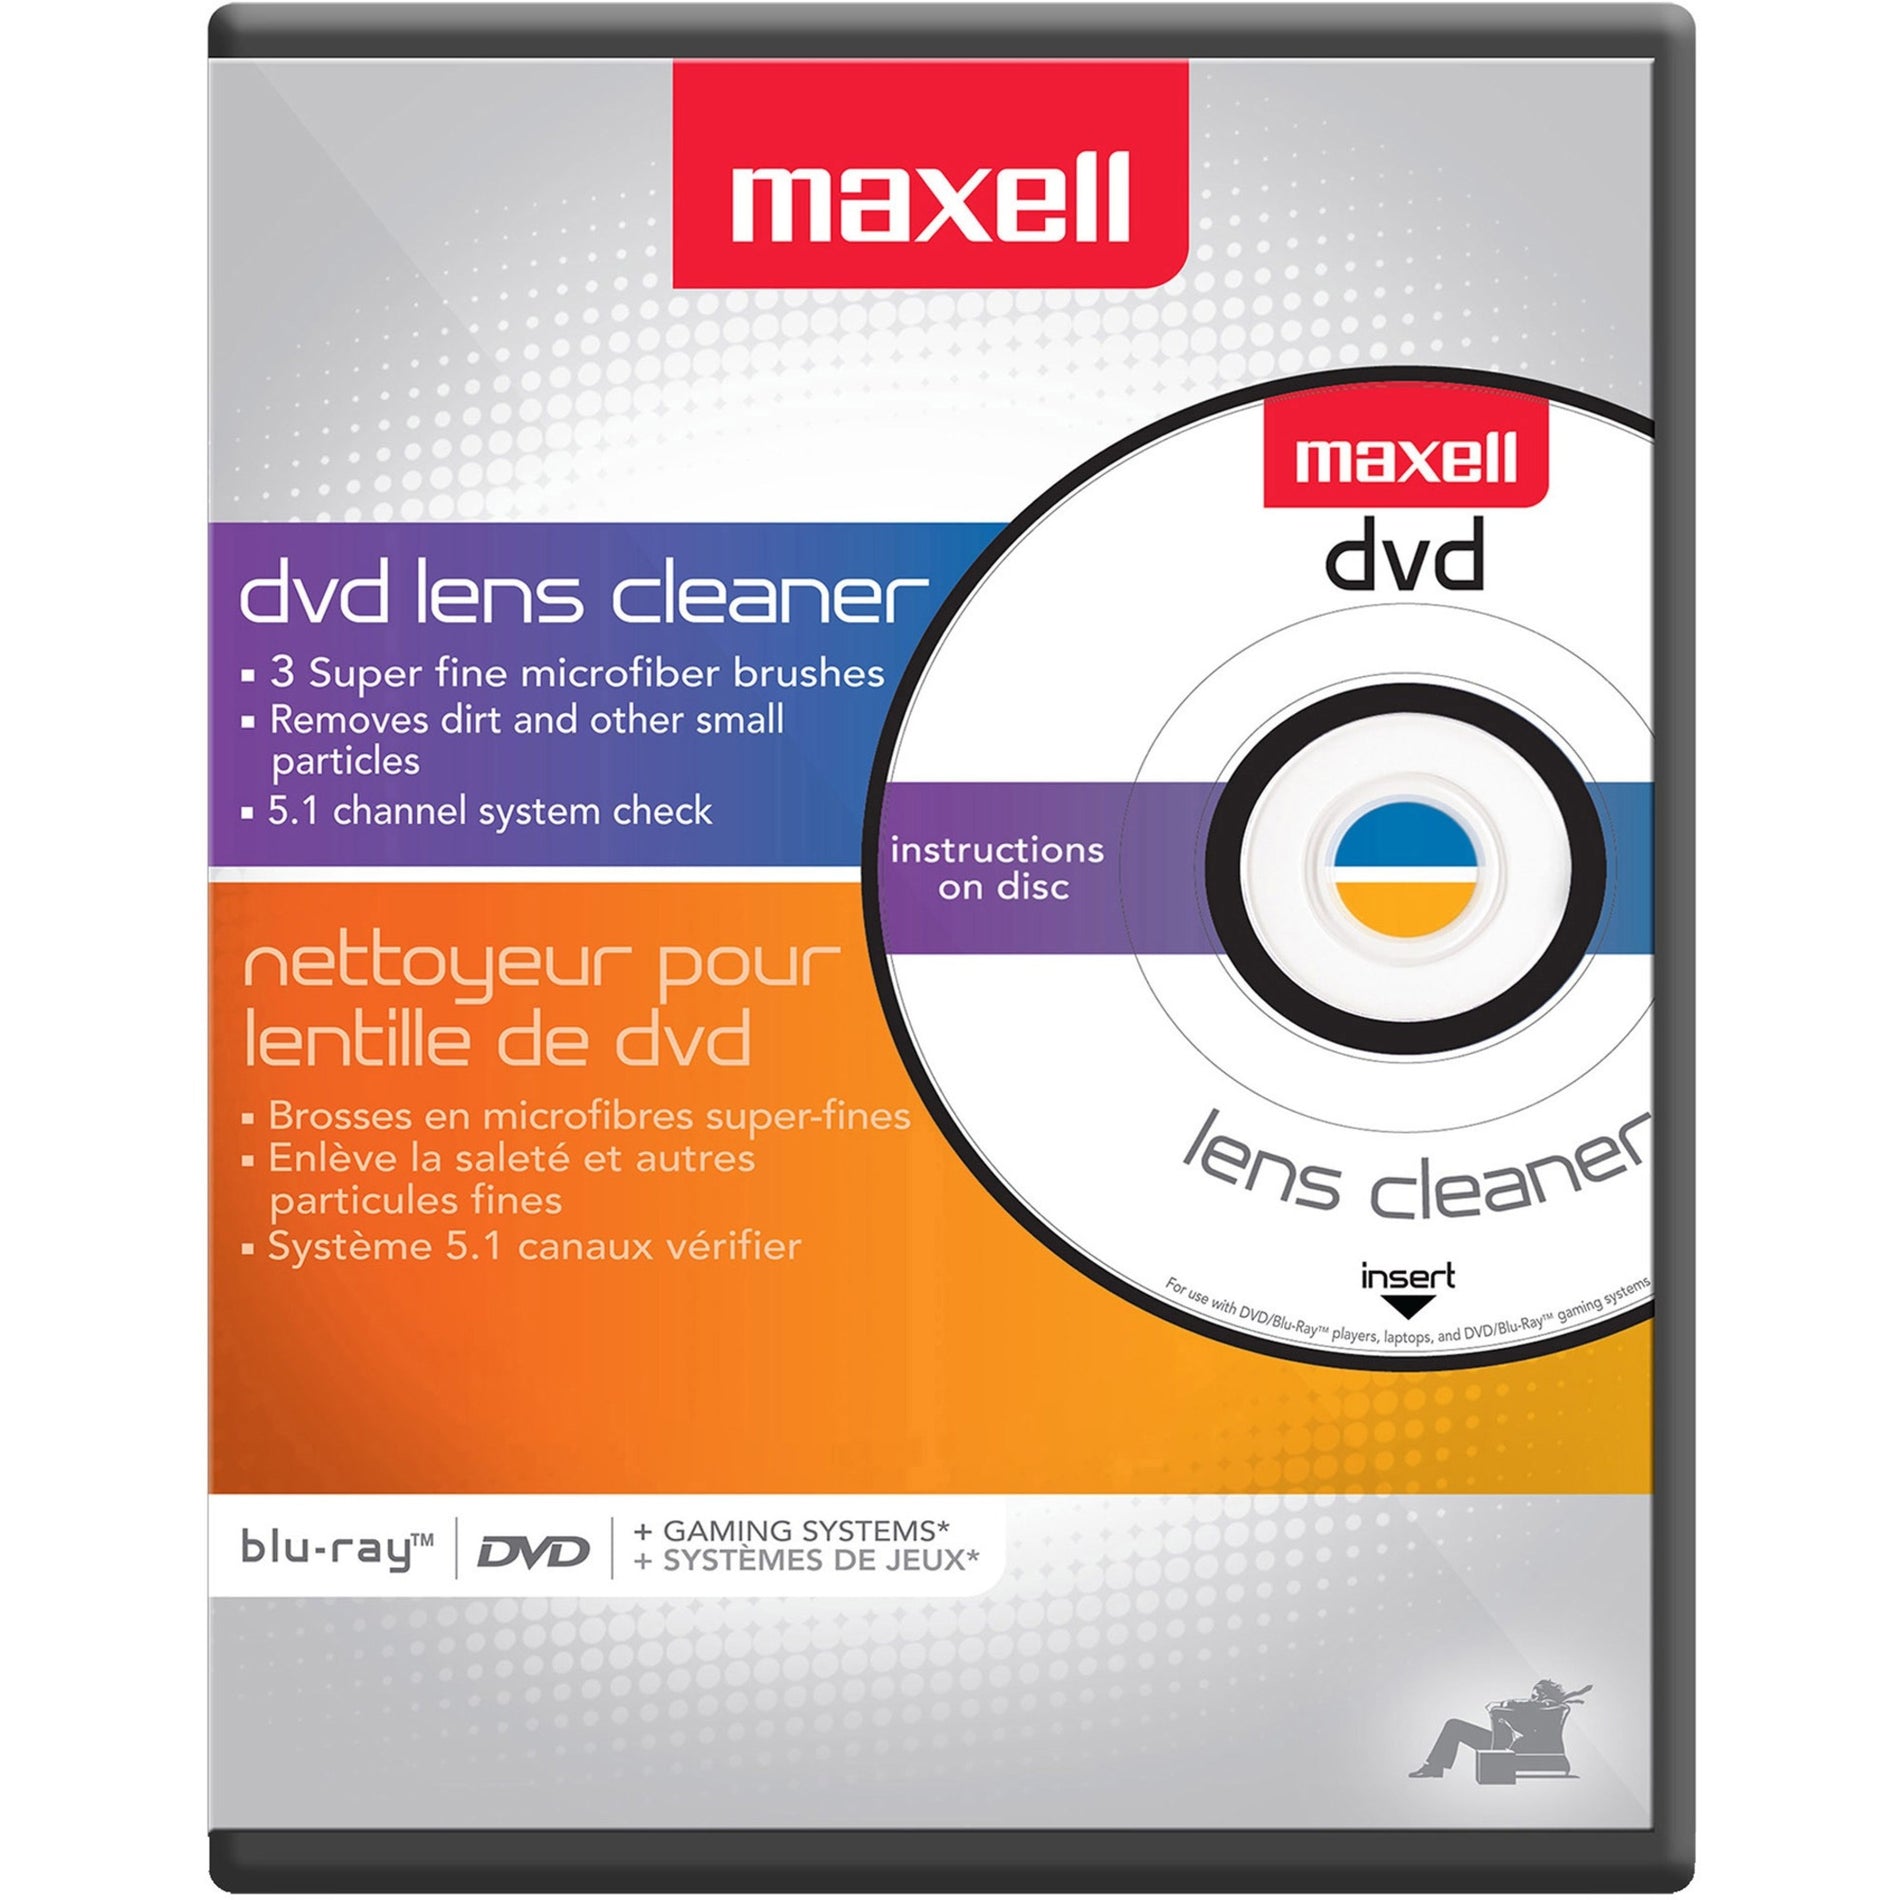 Maxell 190059 DVD-LC DVD Lens Cleaner, for DVD Players, 8 Languages